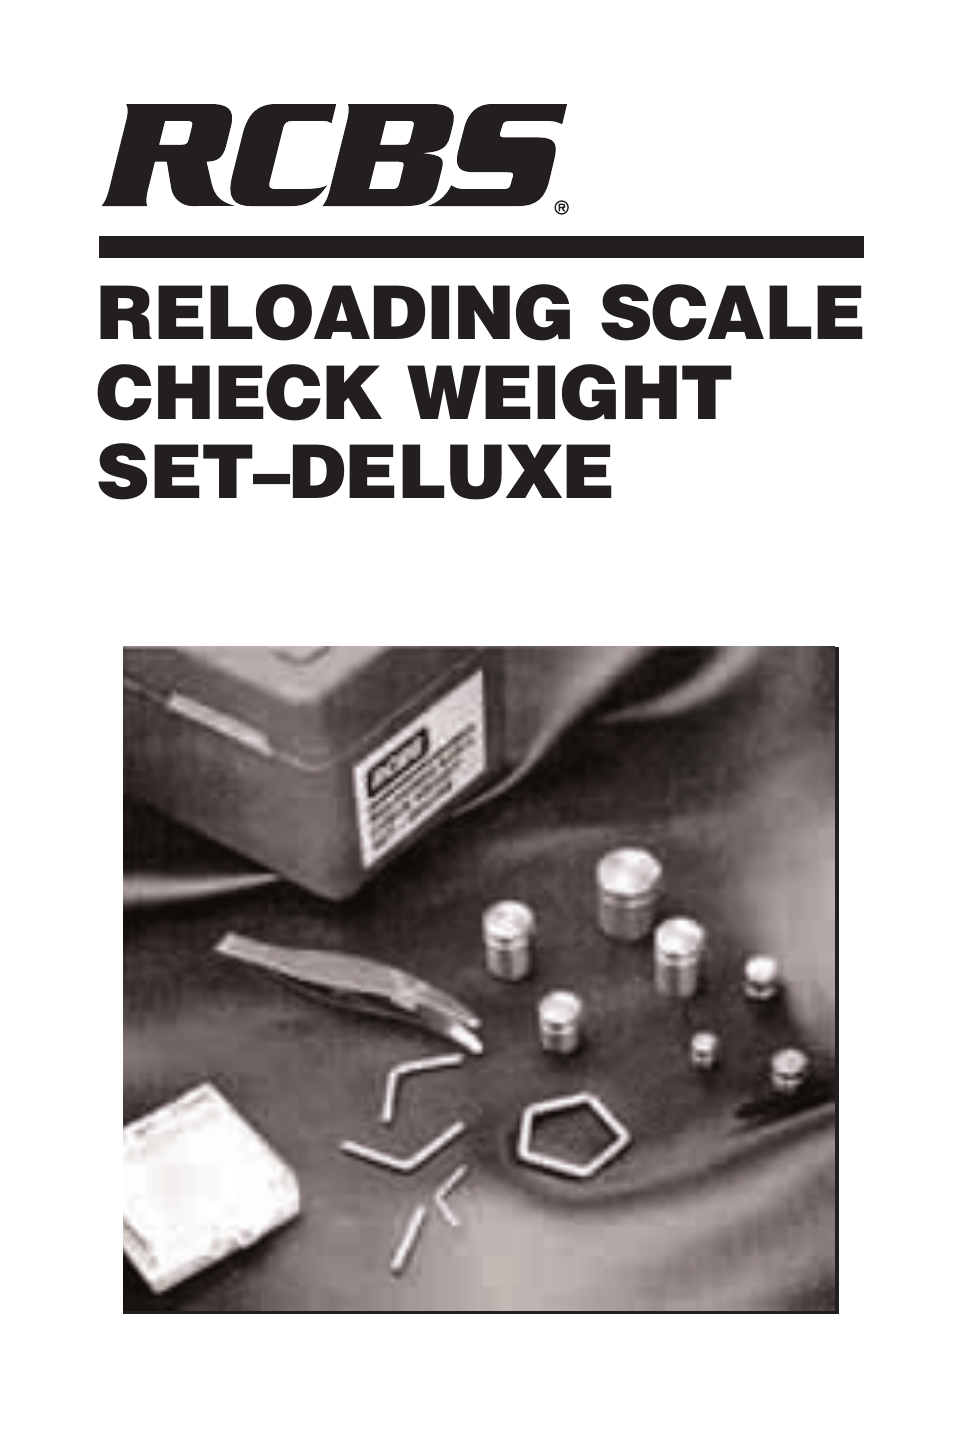 Reloading Scale Check Weight Set